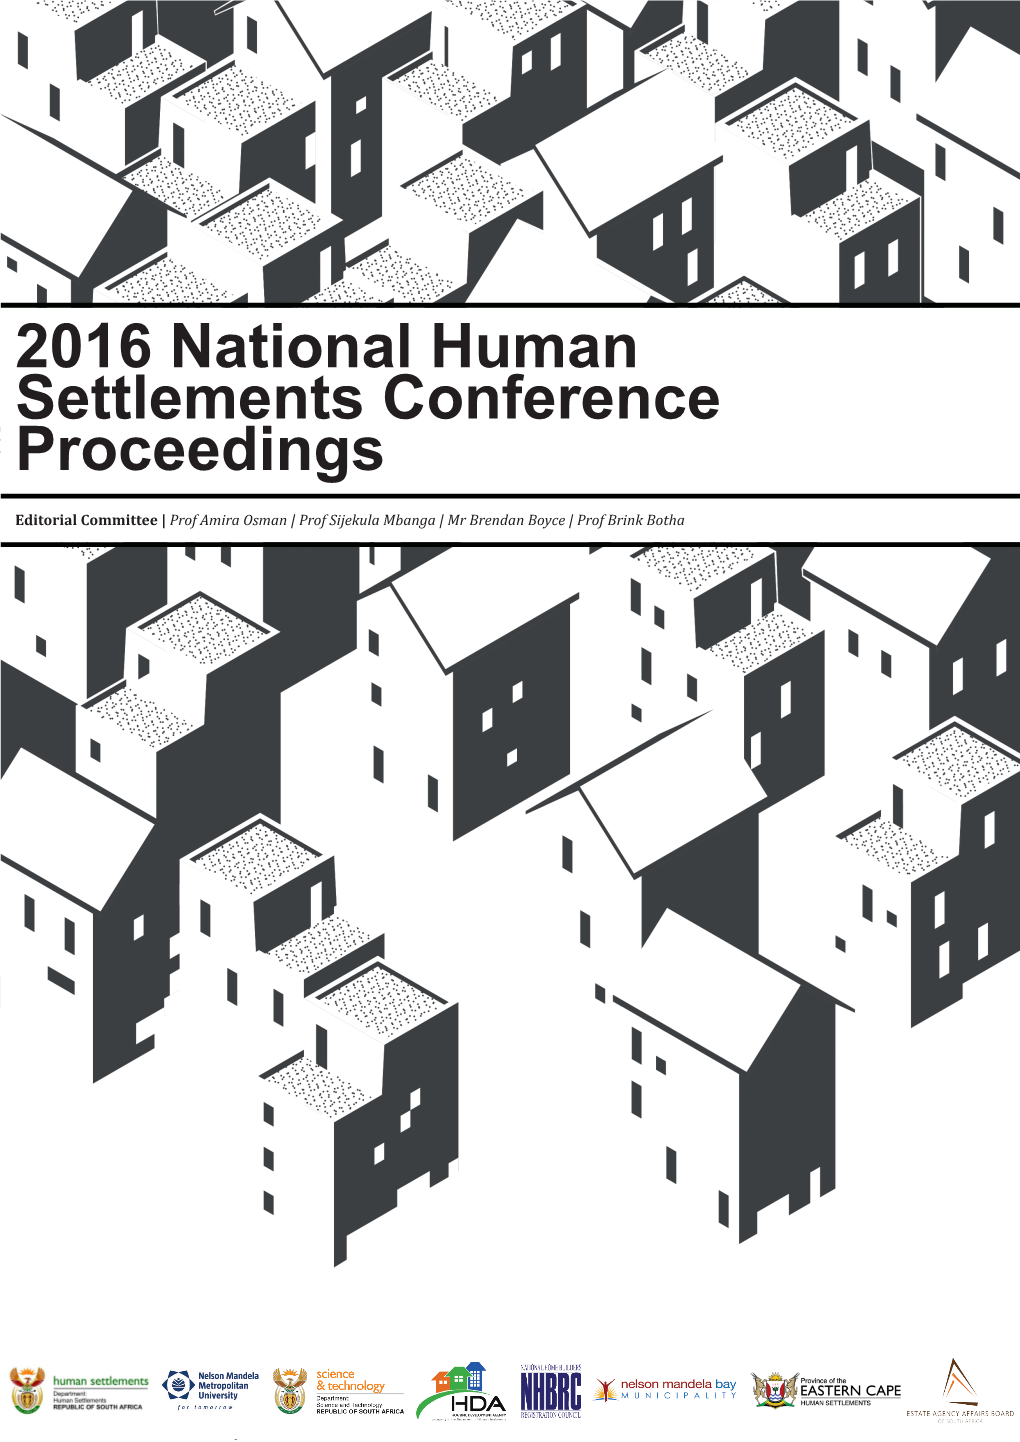 2016 National Human Settlements Conference Proceedings